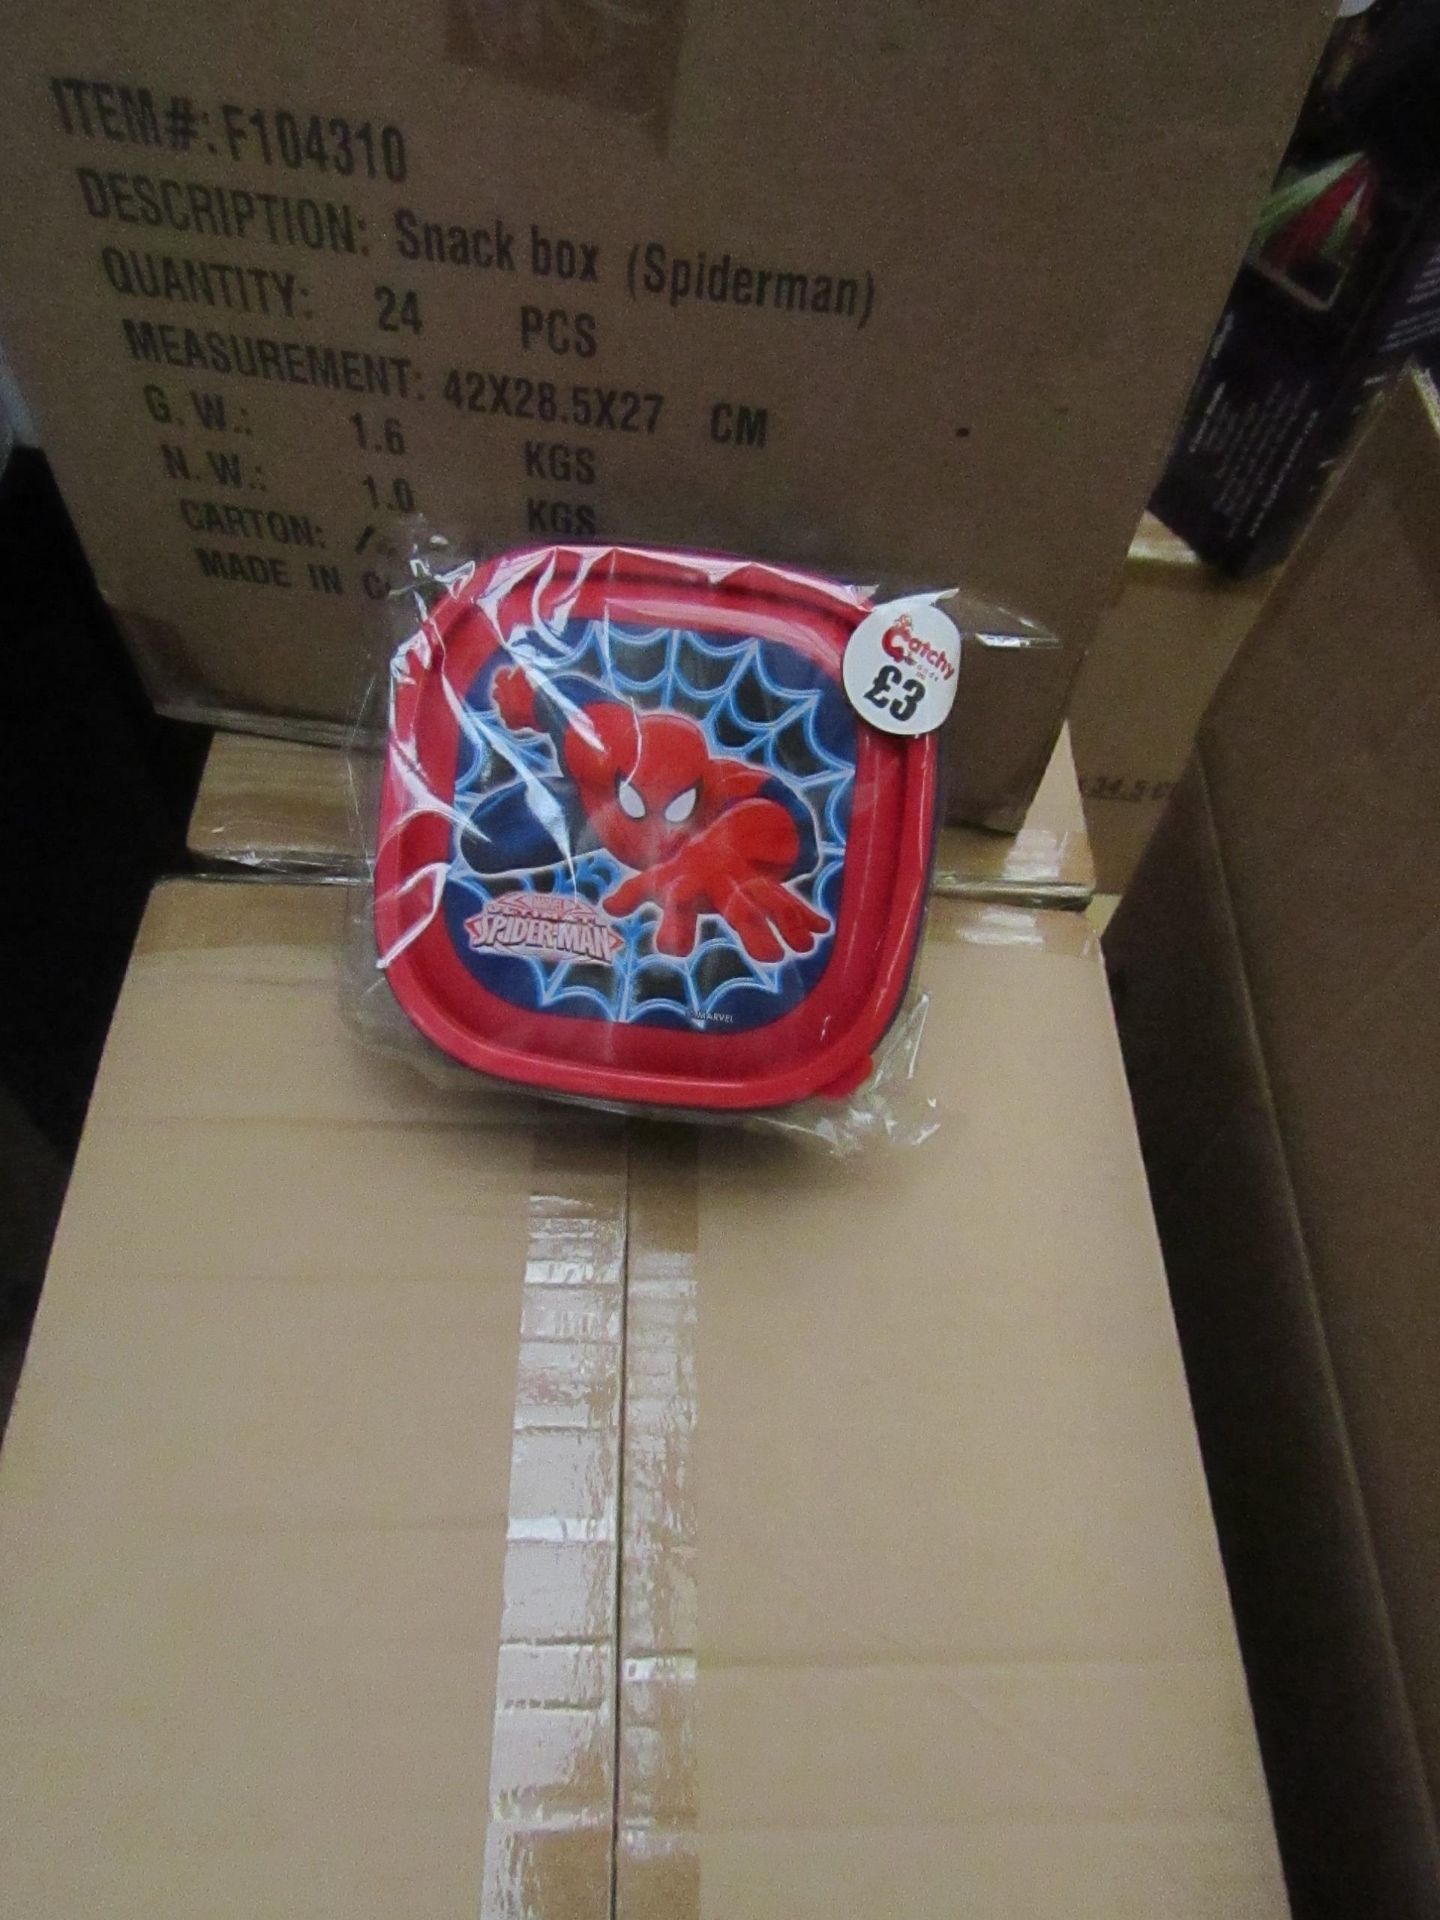 Box of 24 Spiderman Plastic Snack boxes. New & Packaged. RRP £3 each - Image 2 of 2